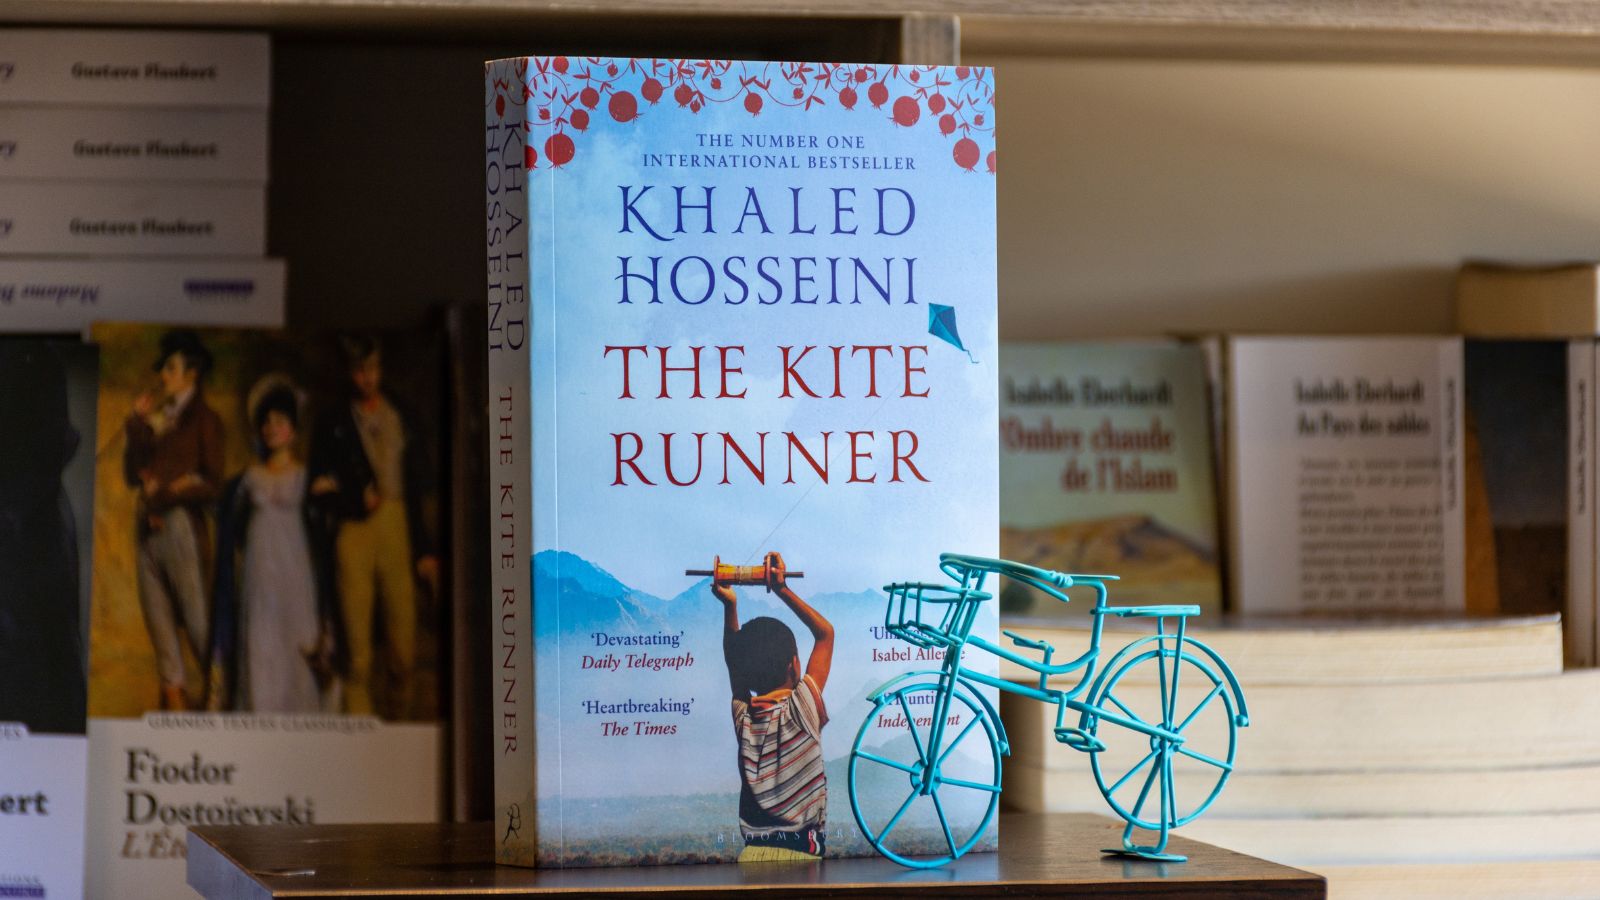 <p>The Kite Runner is Khaled Hosseini's debut novel, and it made an immense impact when it first came out. The book's significance is timeless, chartering a story of friendship that tragically falls apart against the backdrop of war-torn Afghanistan. Themes of guilt plague the protagonist, guiding him through the book's harrowing events on a quest for redemption.</p>